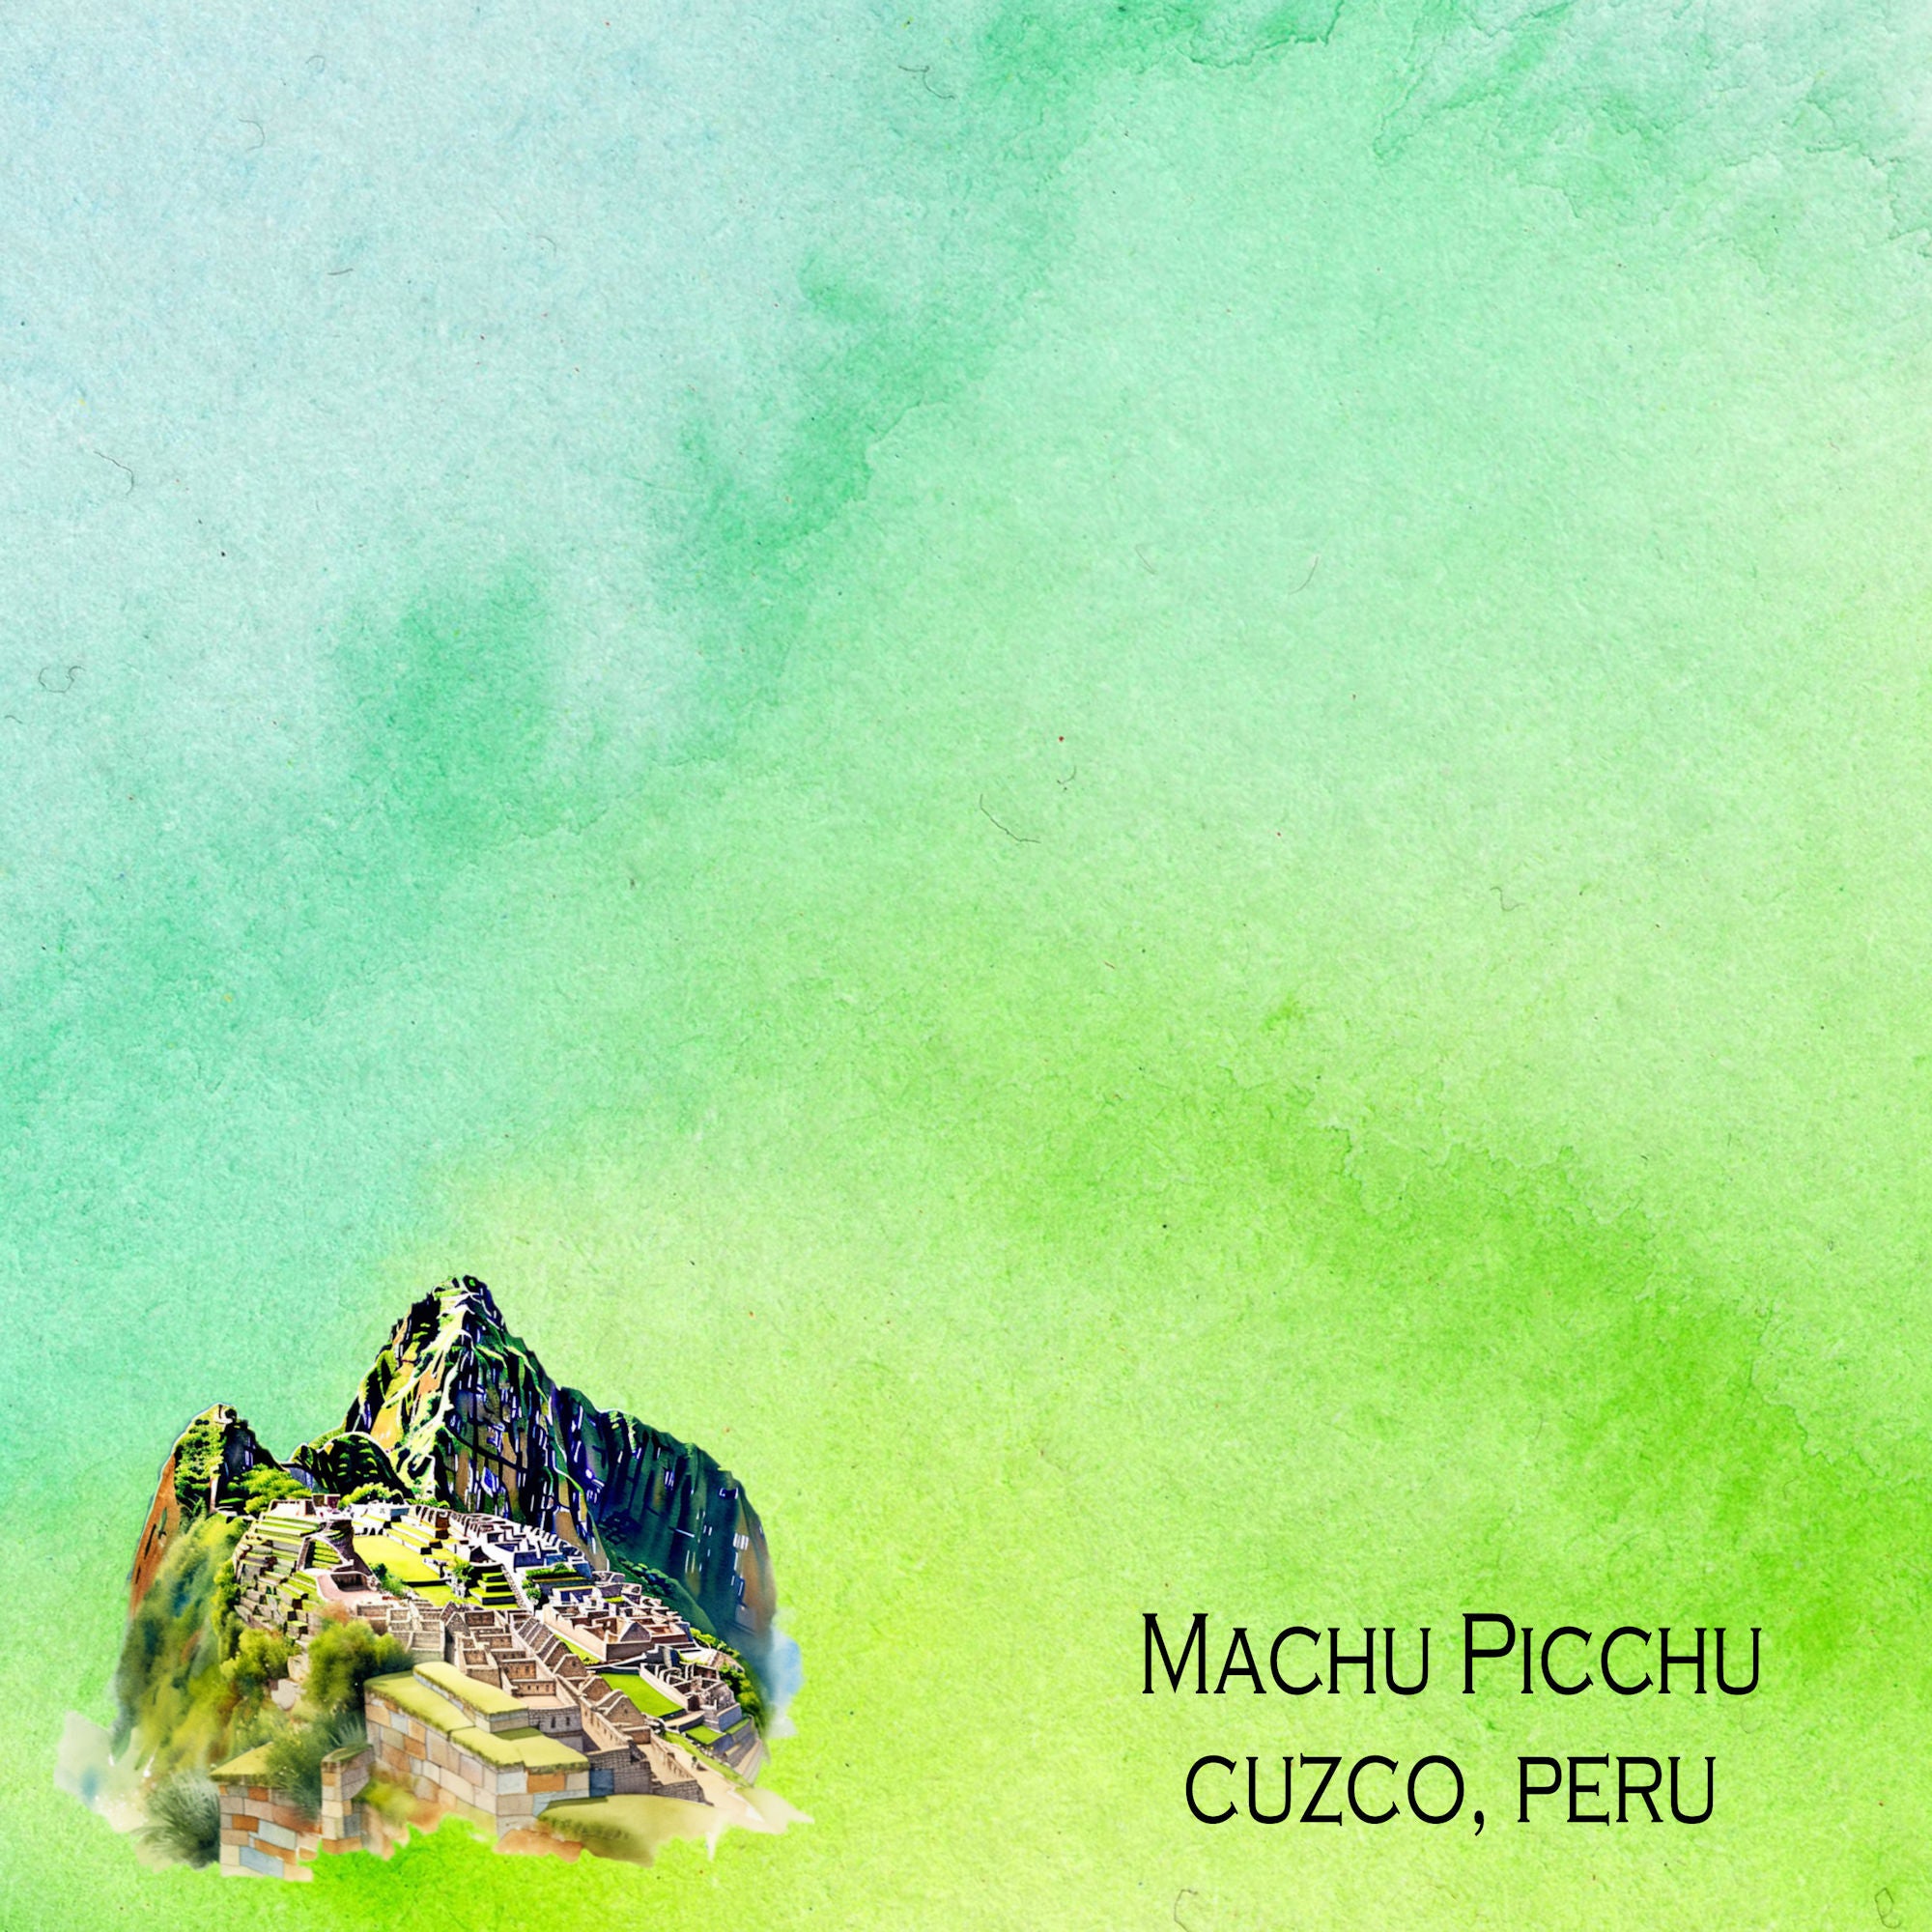 Seven Wonders Collection Machu Picchu 12 x 12 Double-Sided Scrapbook Paper by SSC Designs